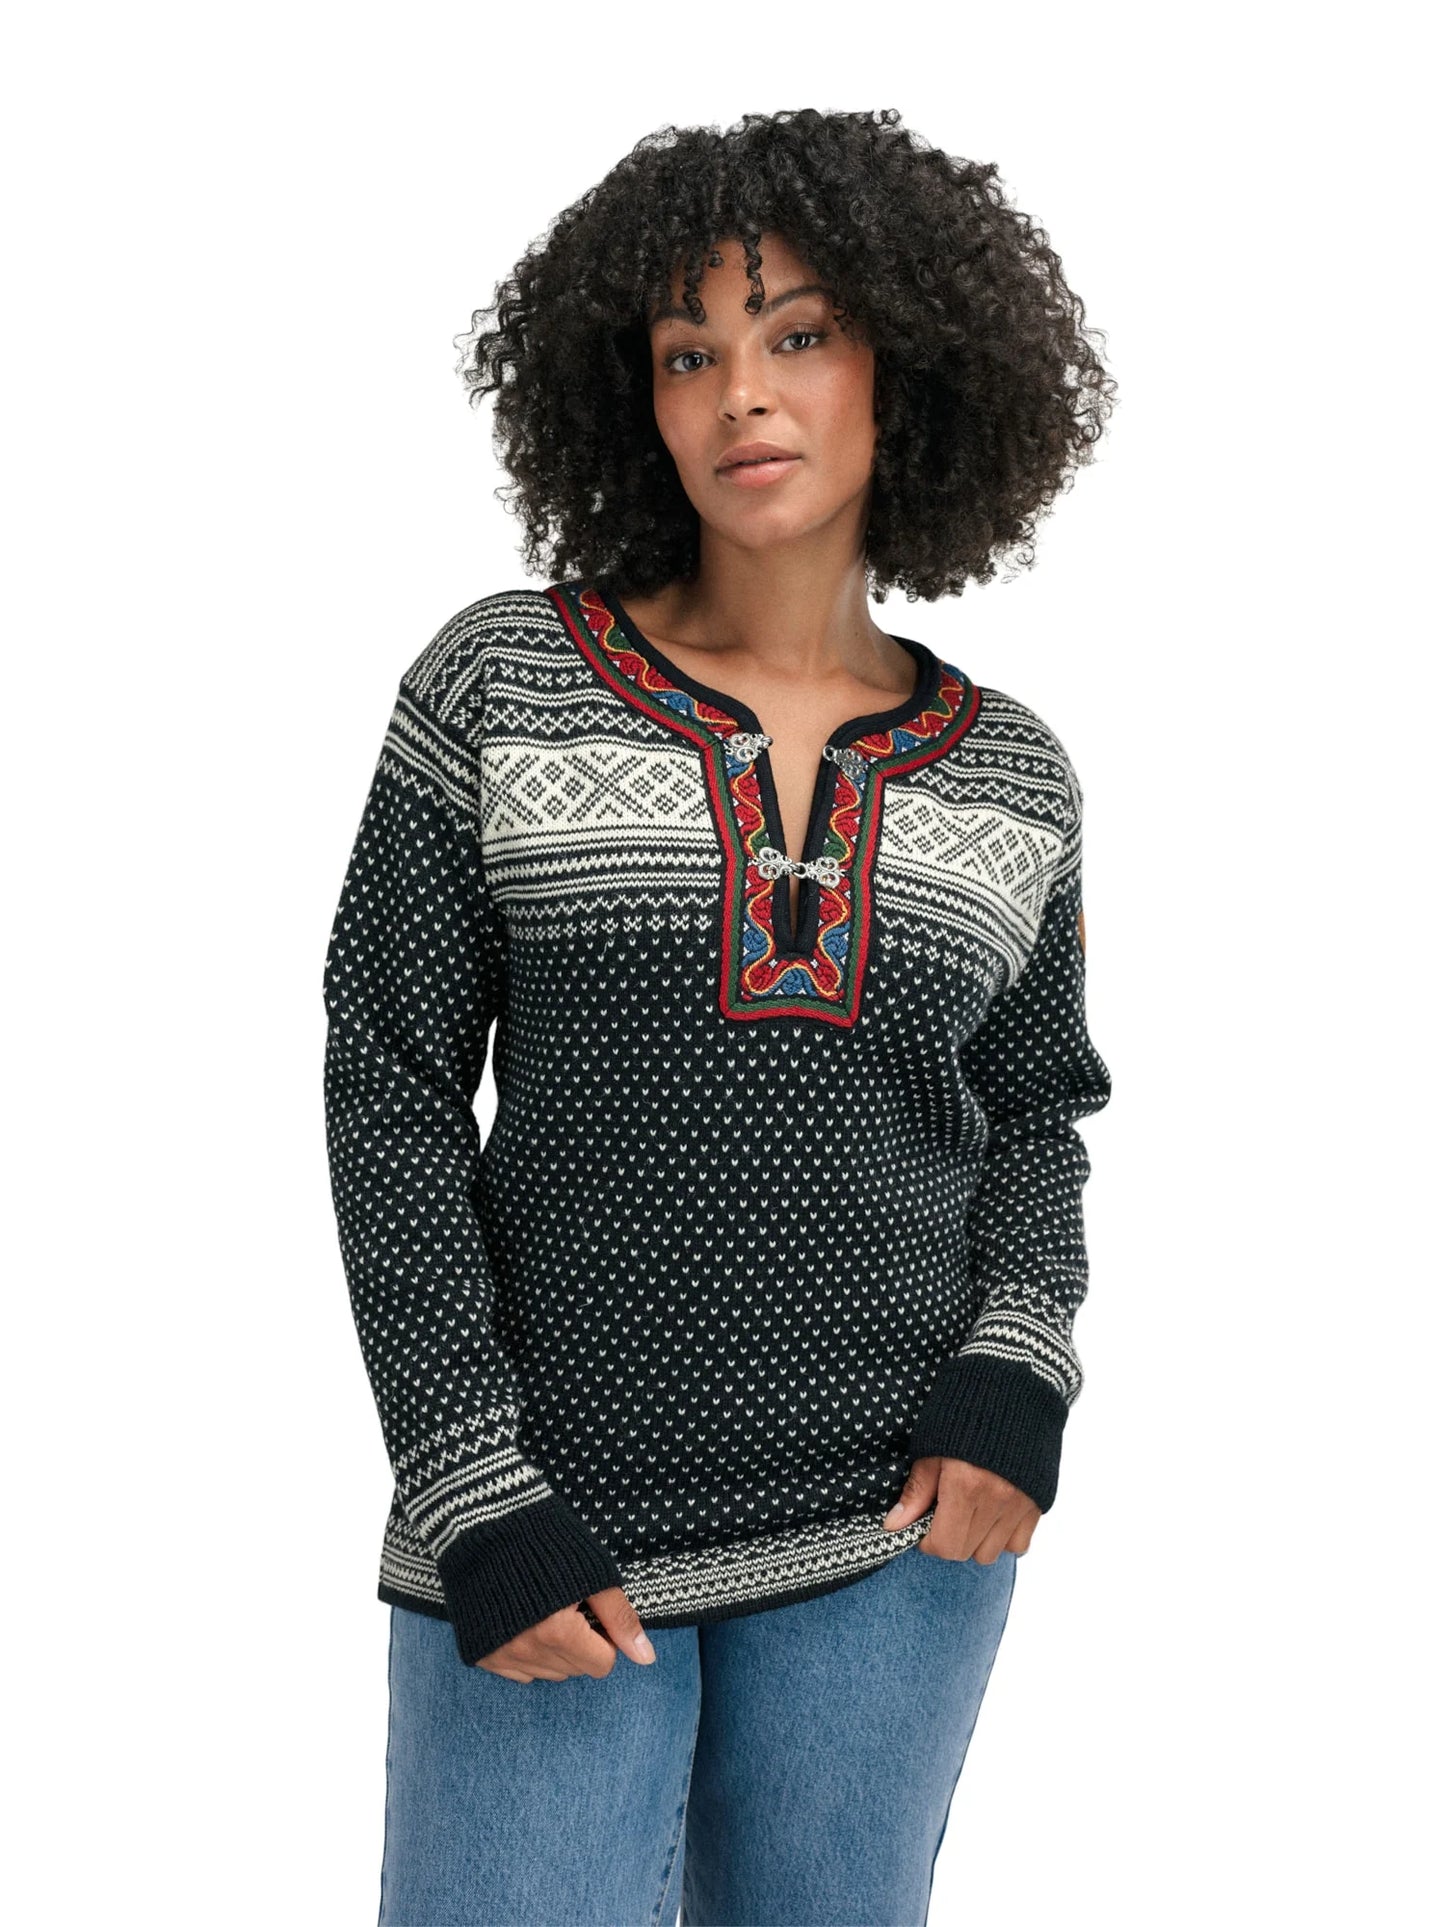 Dale of Norway - Setesdal Sweater - Black offwhite (Unisex)